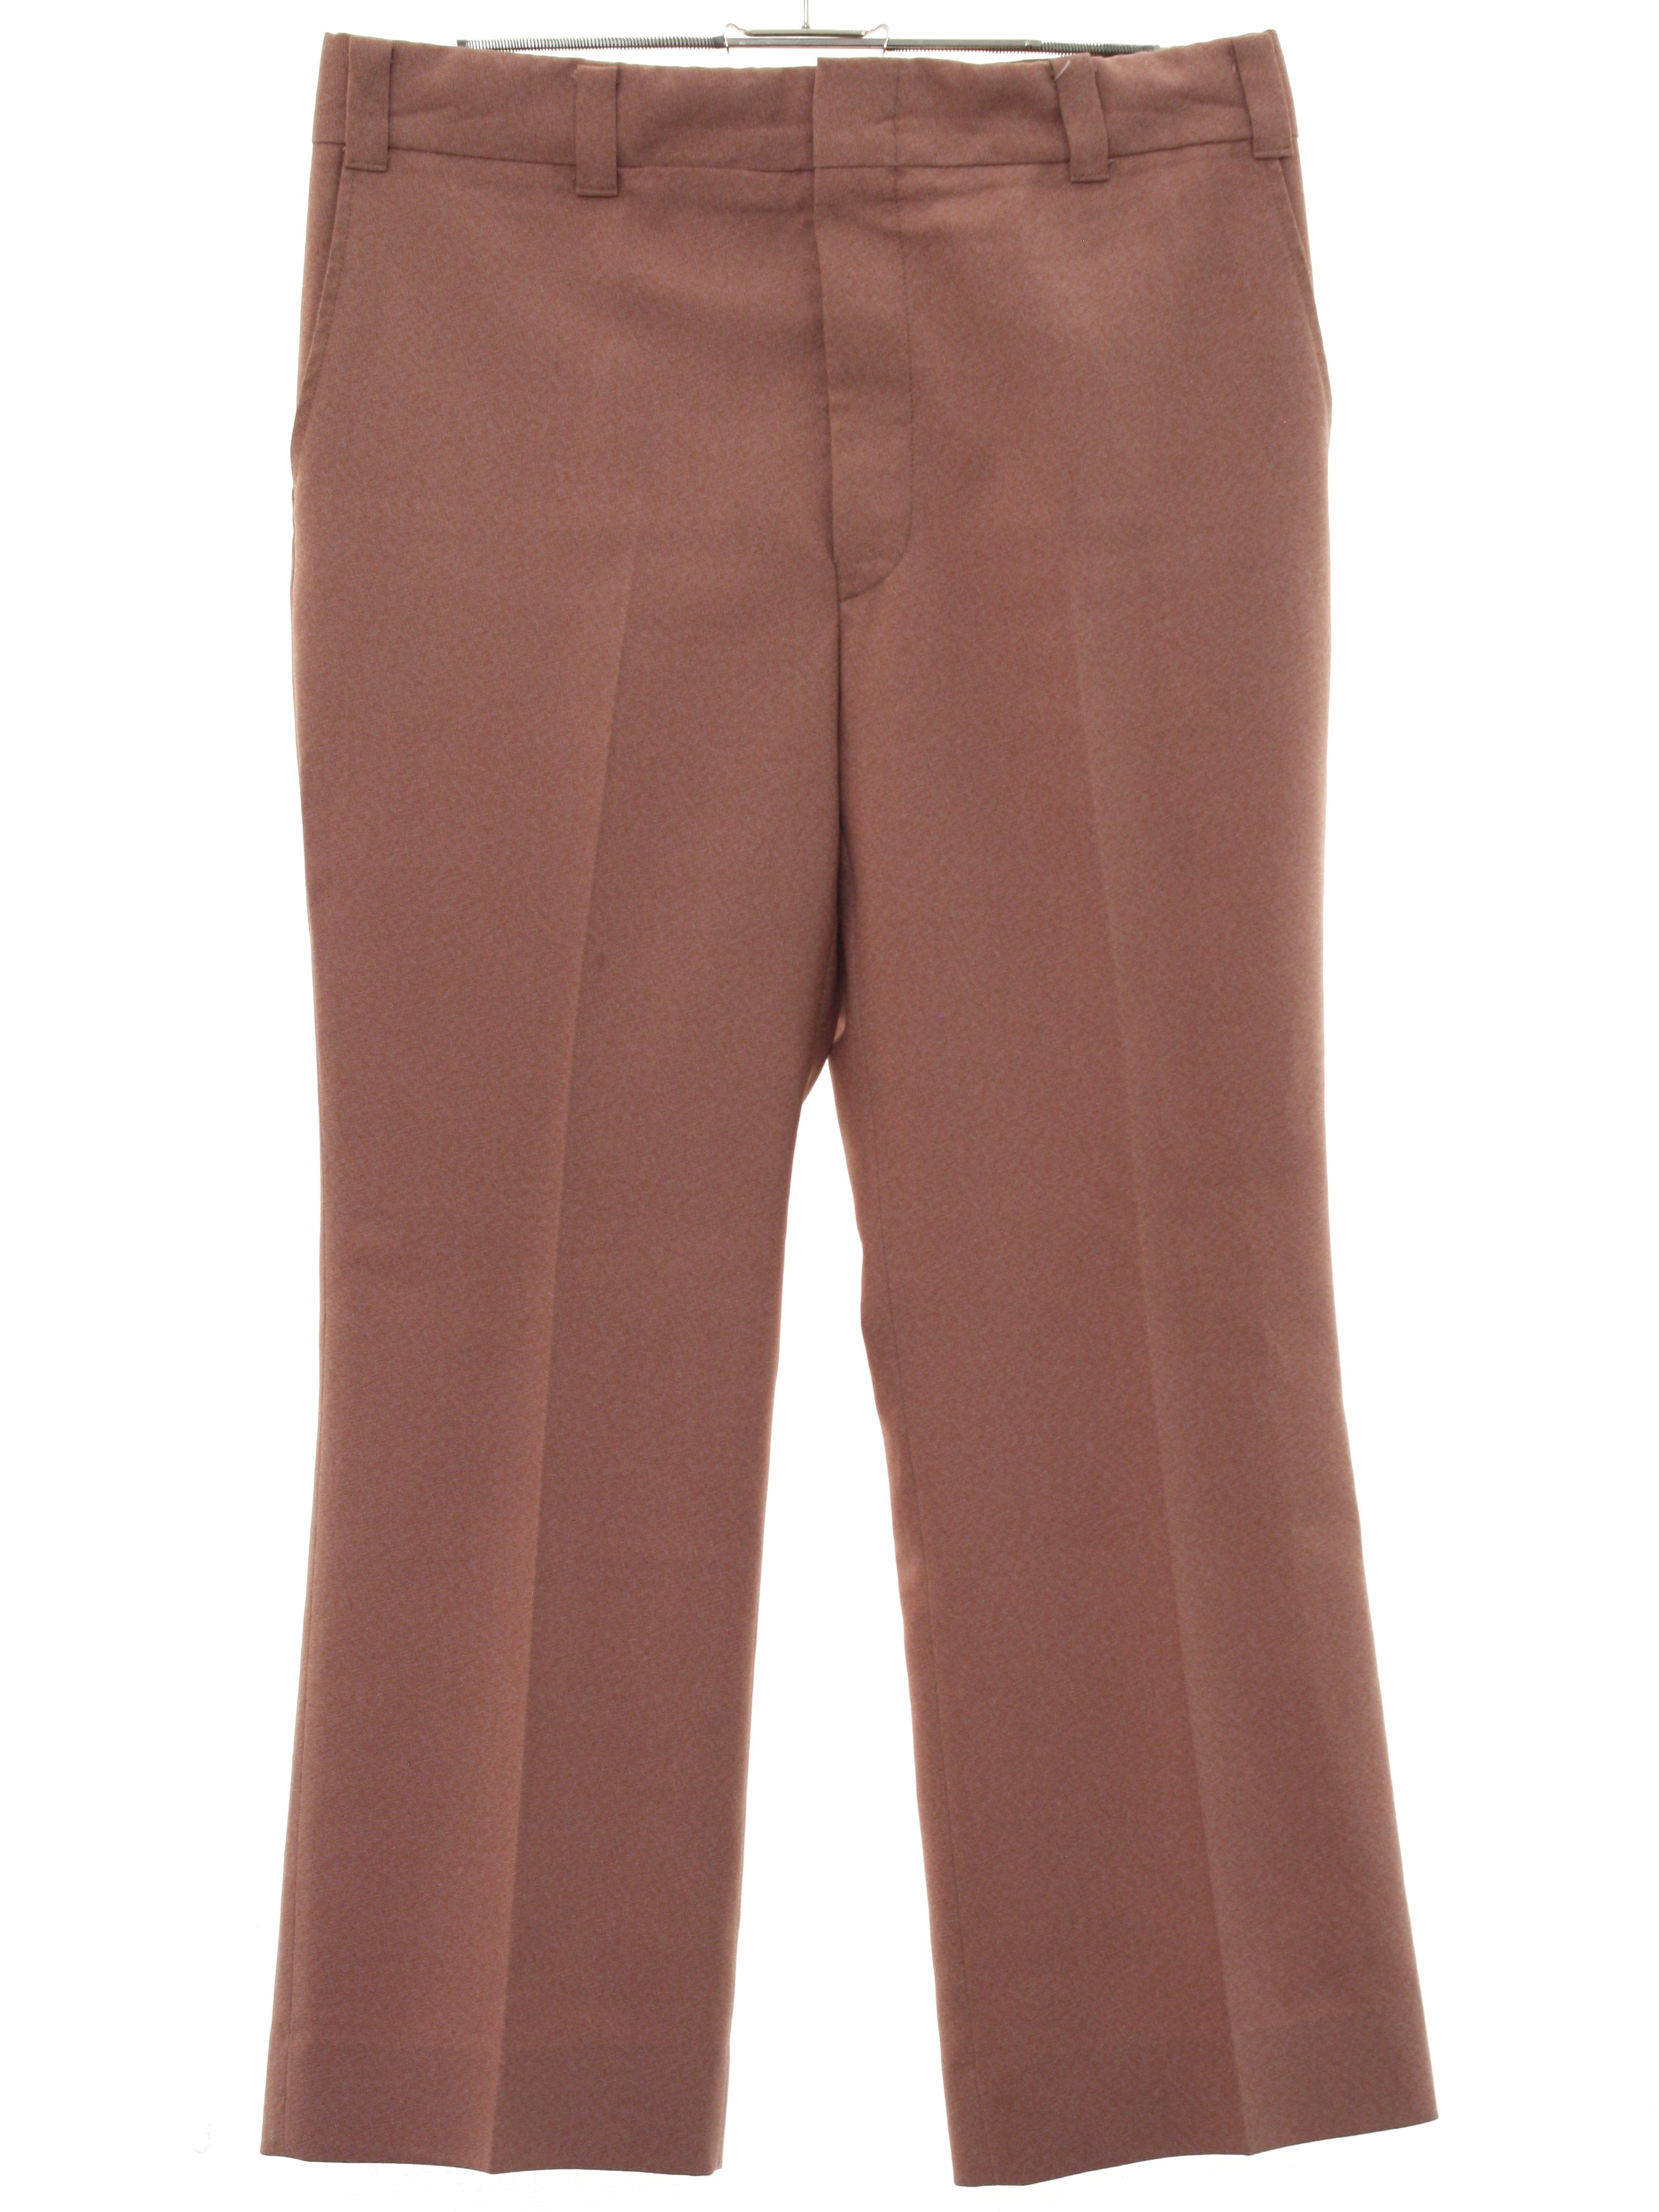 Retro 70's Flared Pants / Flares: 70s -No Label- Mens Heathered rusty ...